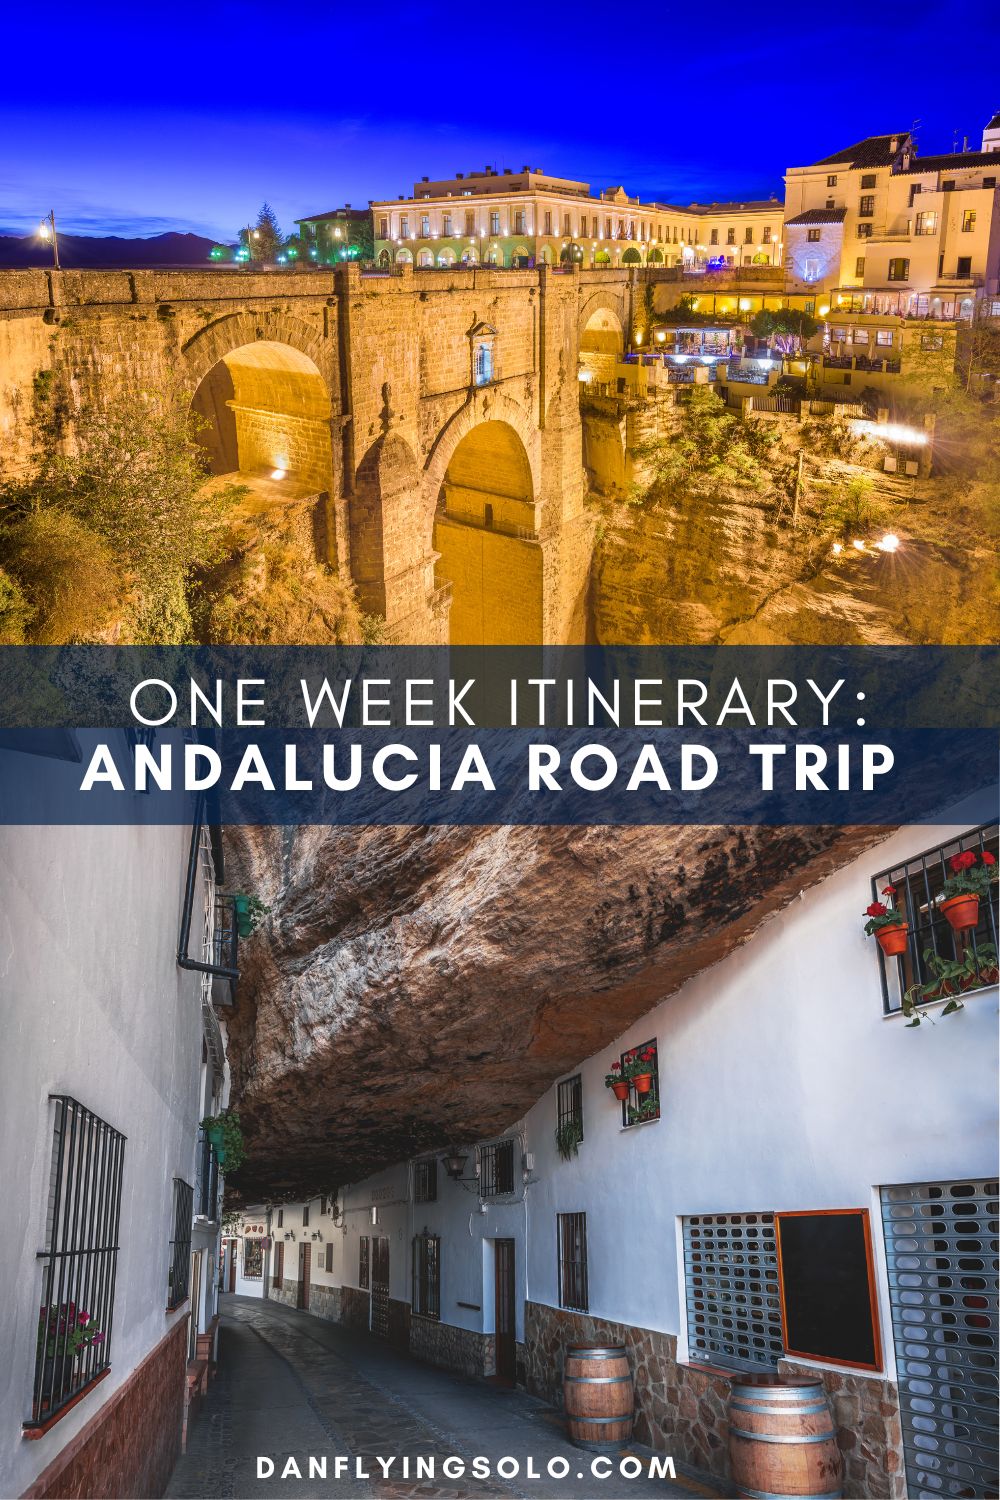 Discover the highlights and hidden gems of Malaga Province (and Granada) on this one week Andalucia road trip Itinerary.